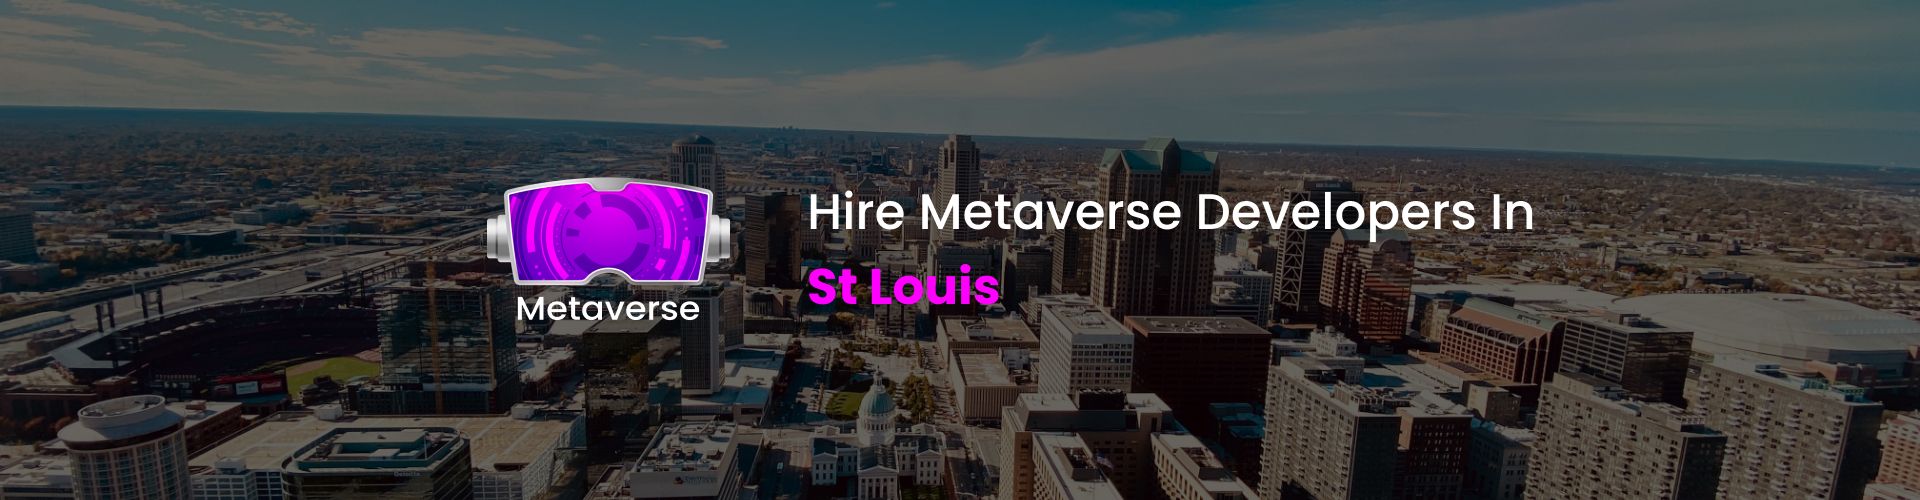 hire metaverse developers in st louis